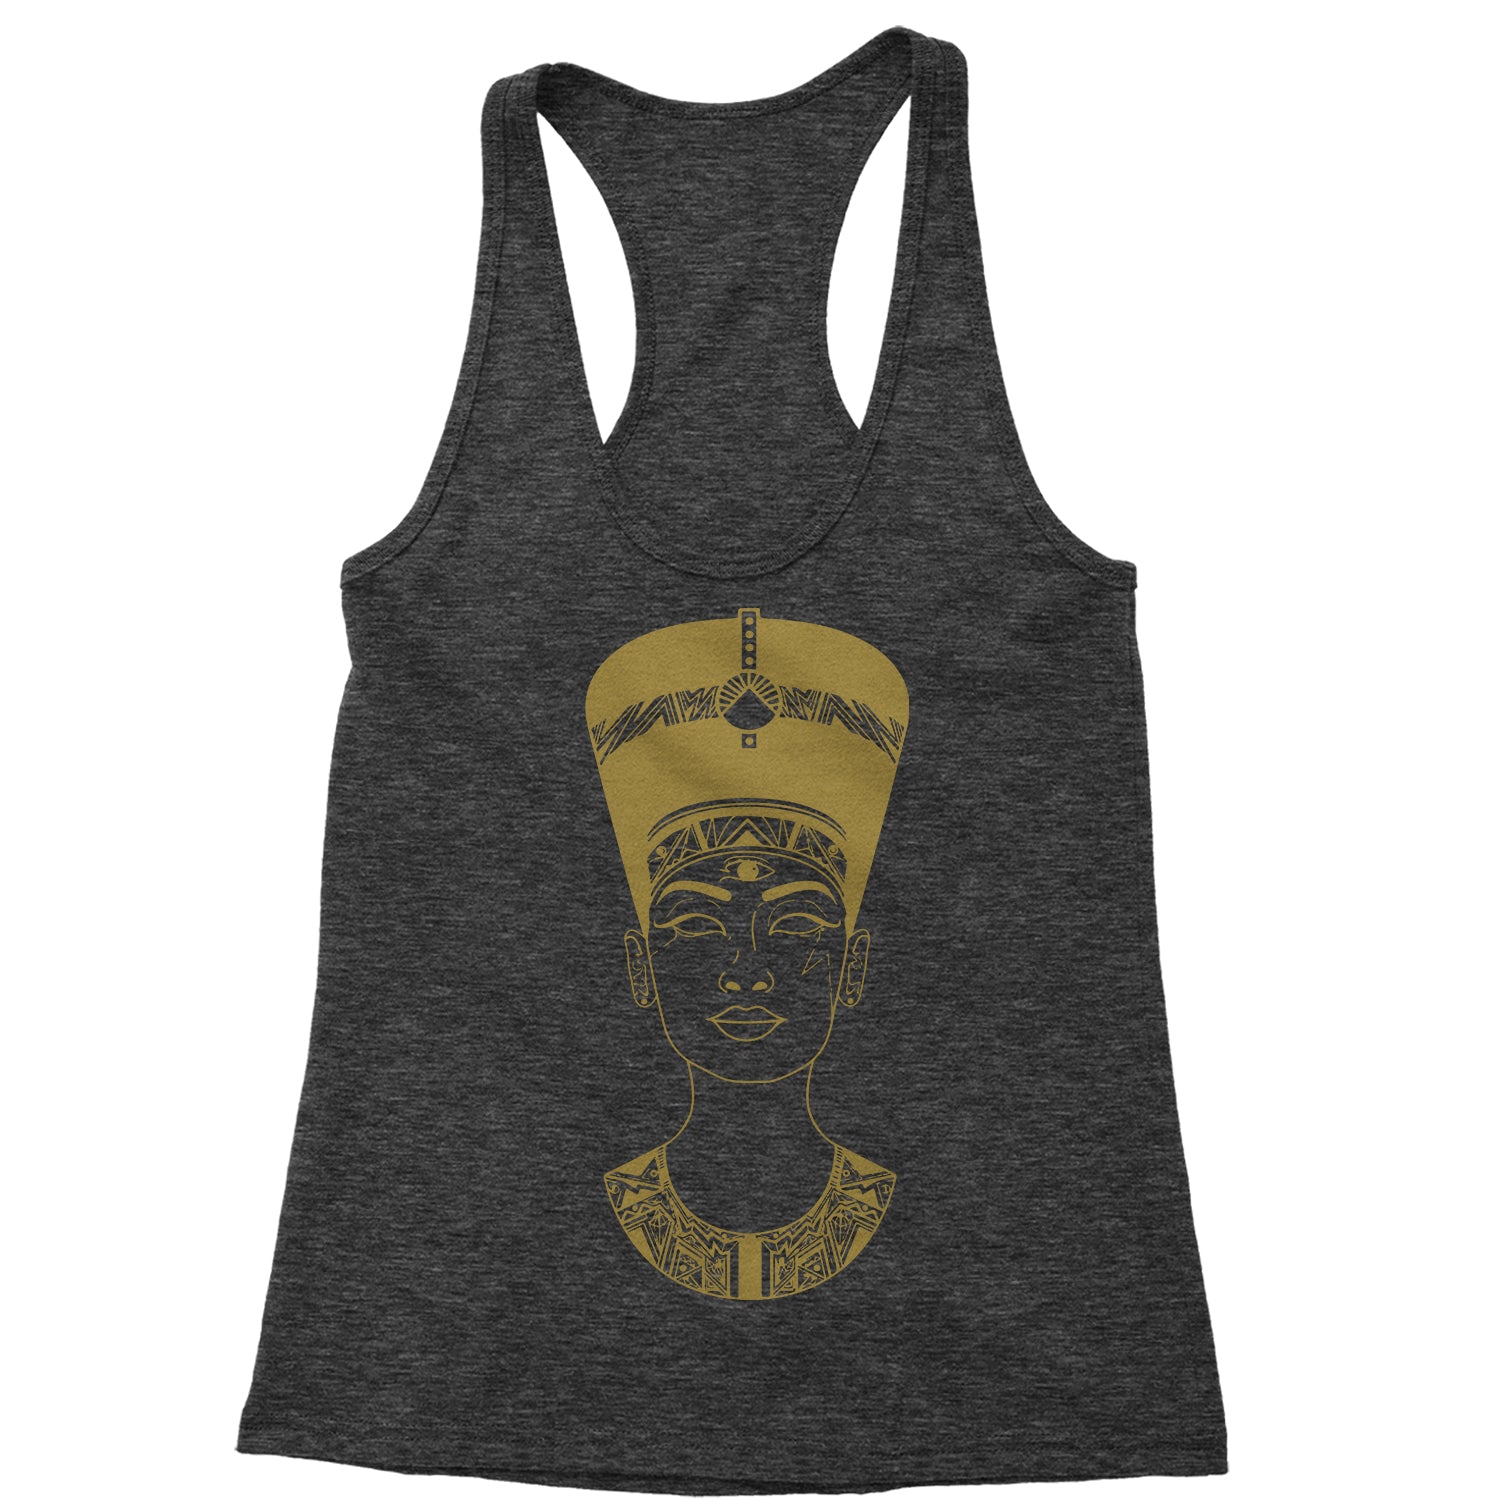 Nefertiti Egyptian Queen Racerback Tank Top for Women african, american, aten, egyptian, goddess by Expression Tees